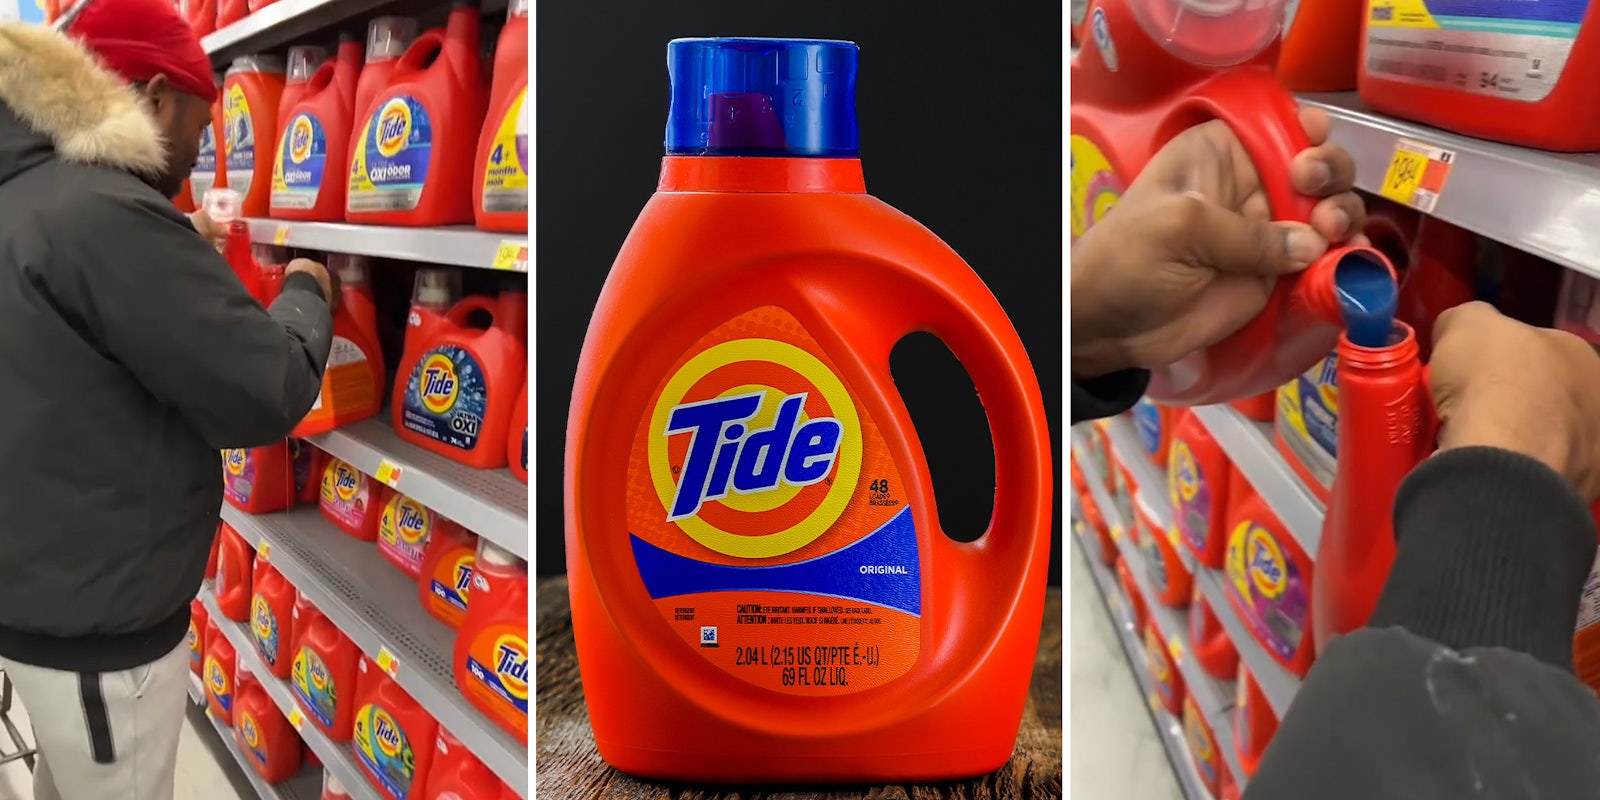 Shopper catches friend pouring Tide detergent from one container into the next